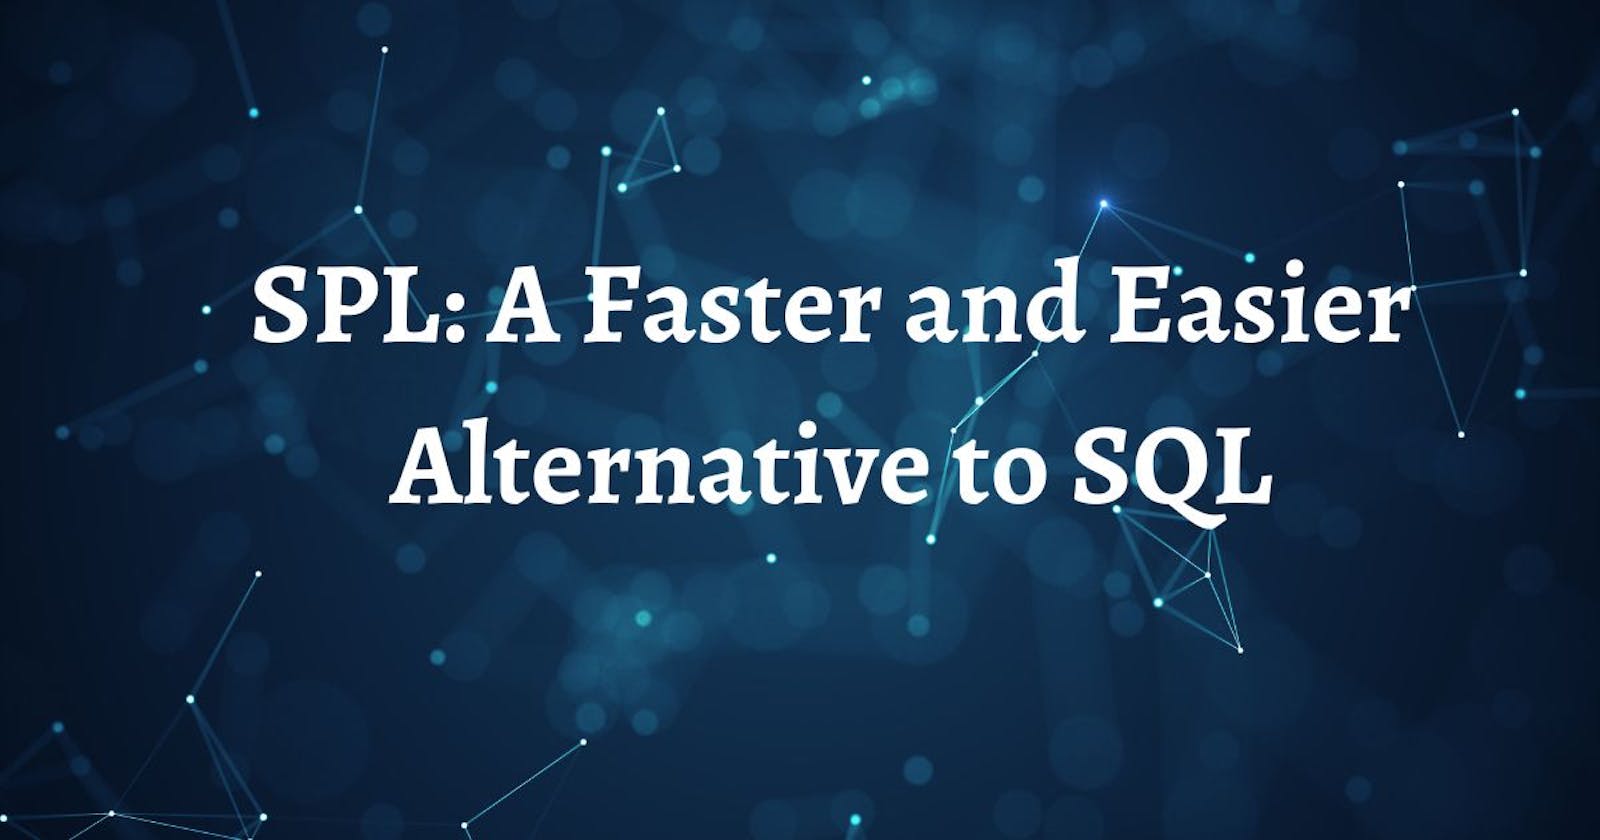 SPL: A Faster and Easier Alternative to SQL